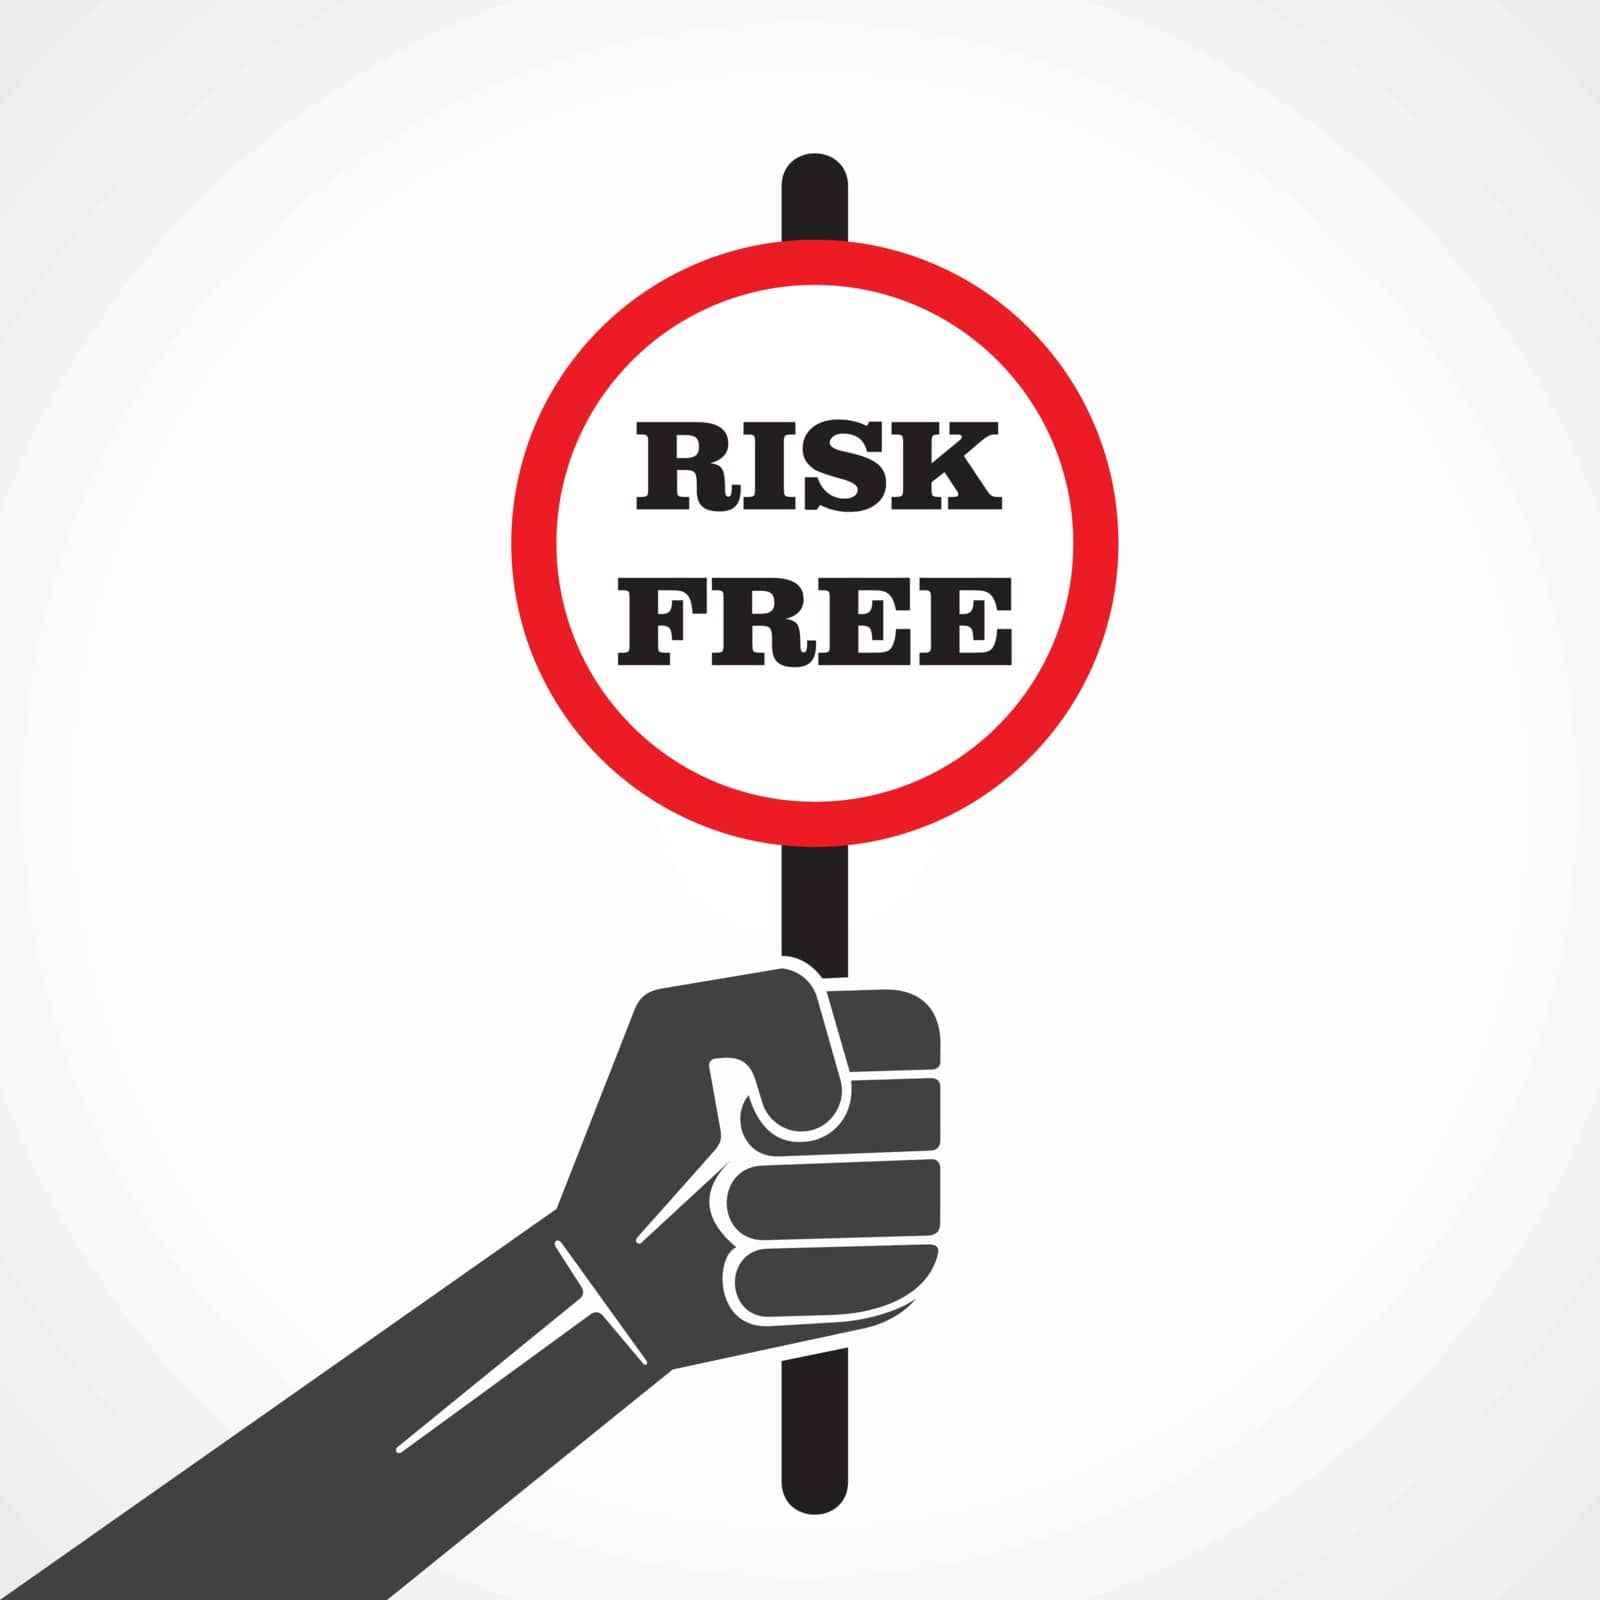 risk free placard hold in hand stock vector